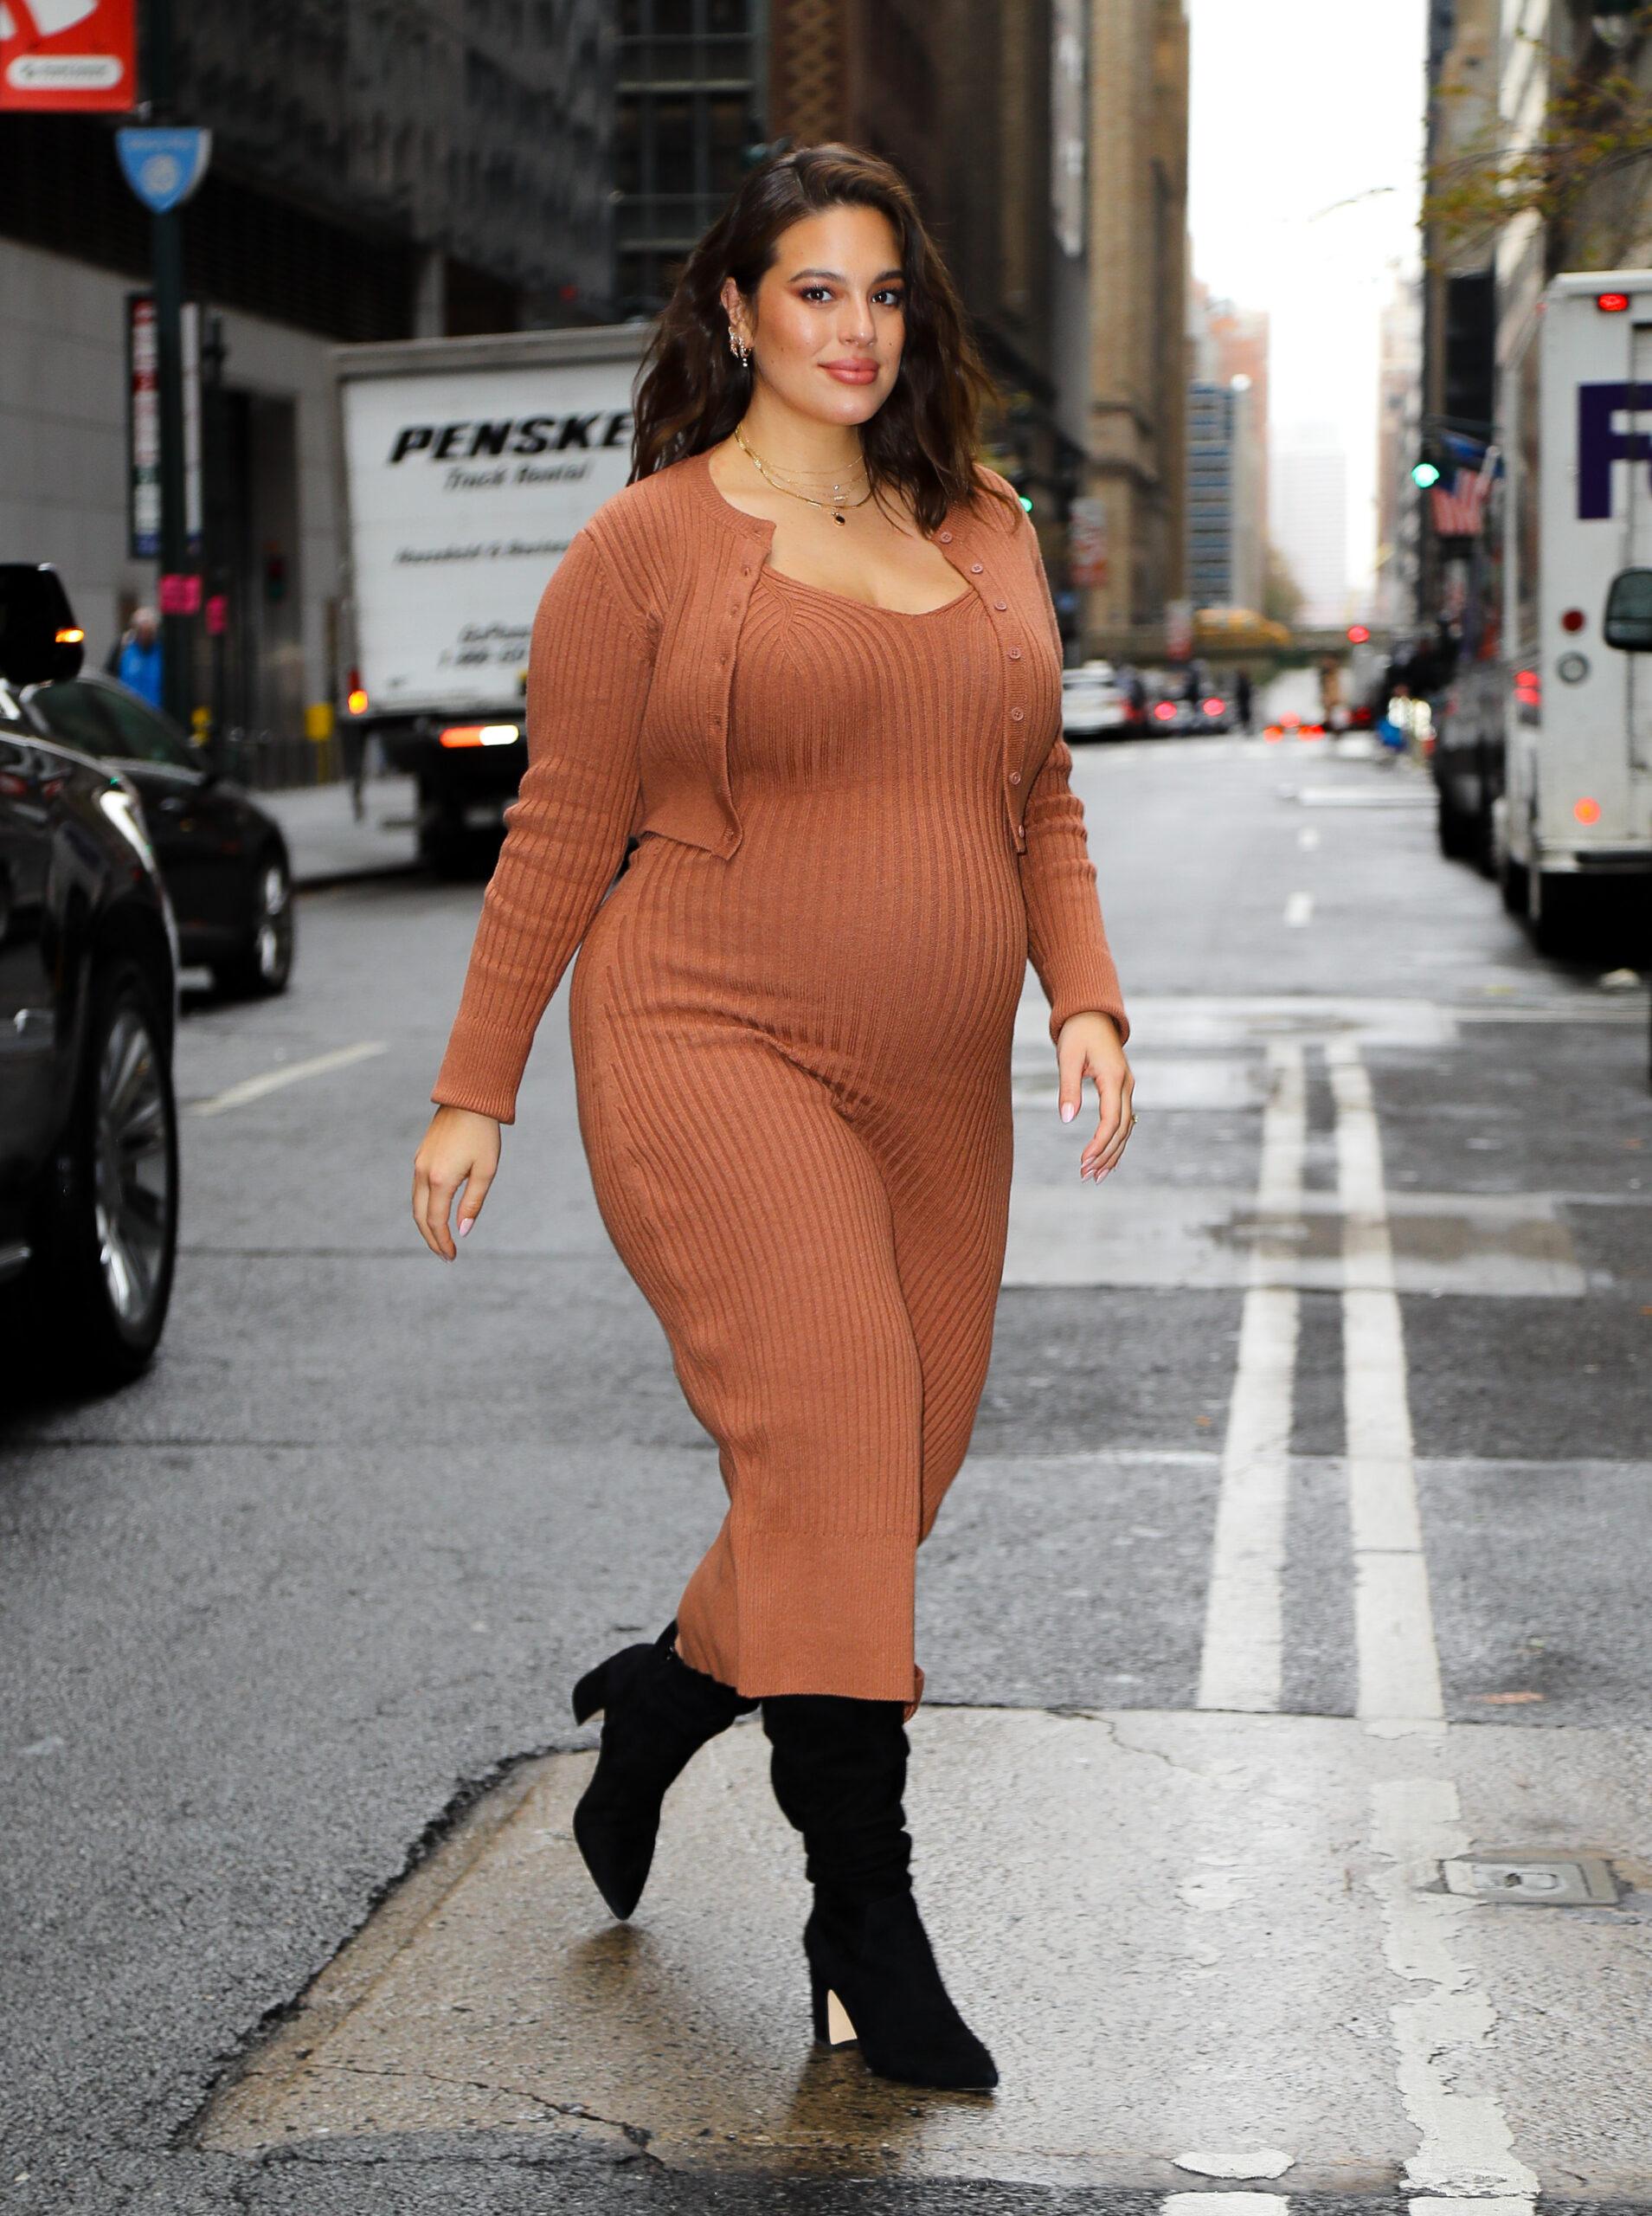 Ashley Graham Pregnant with first child Ashley Graham seen out and about in New York City on Nov 18, 2019